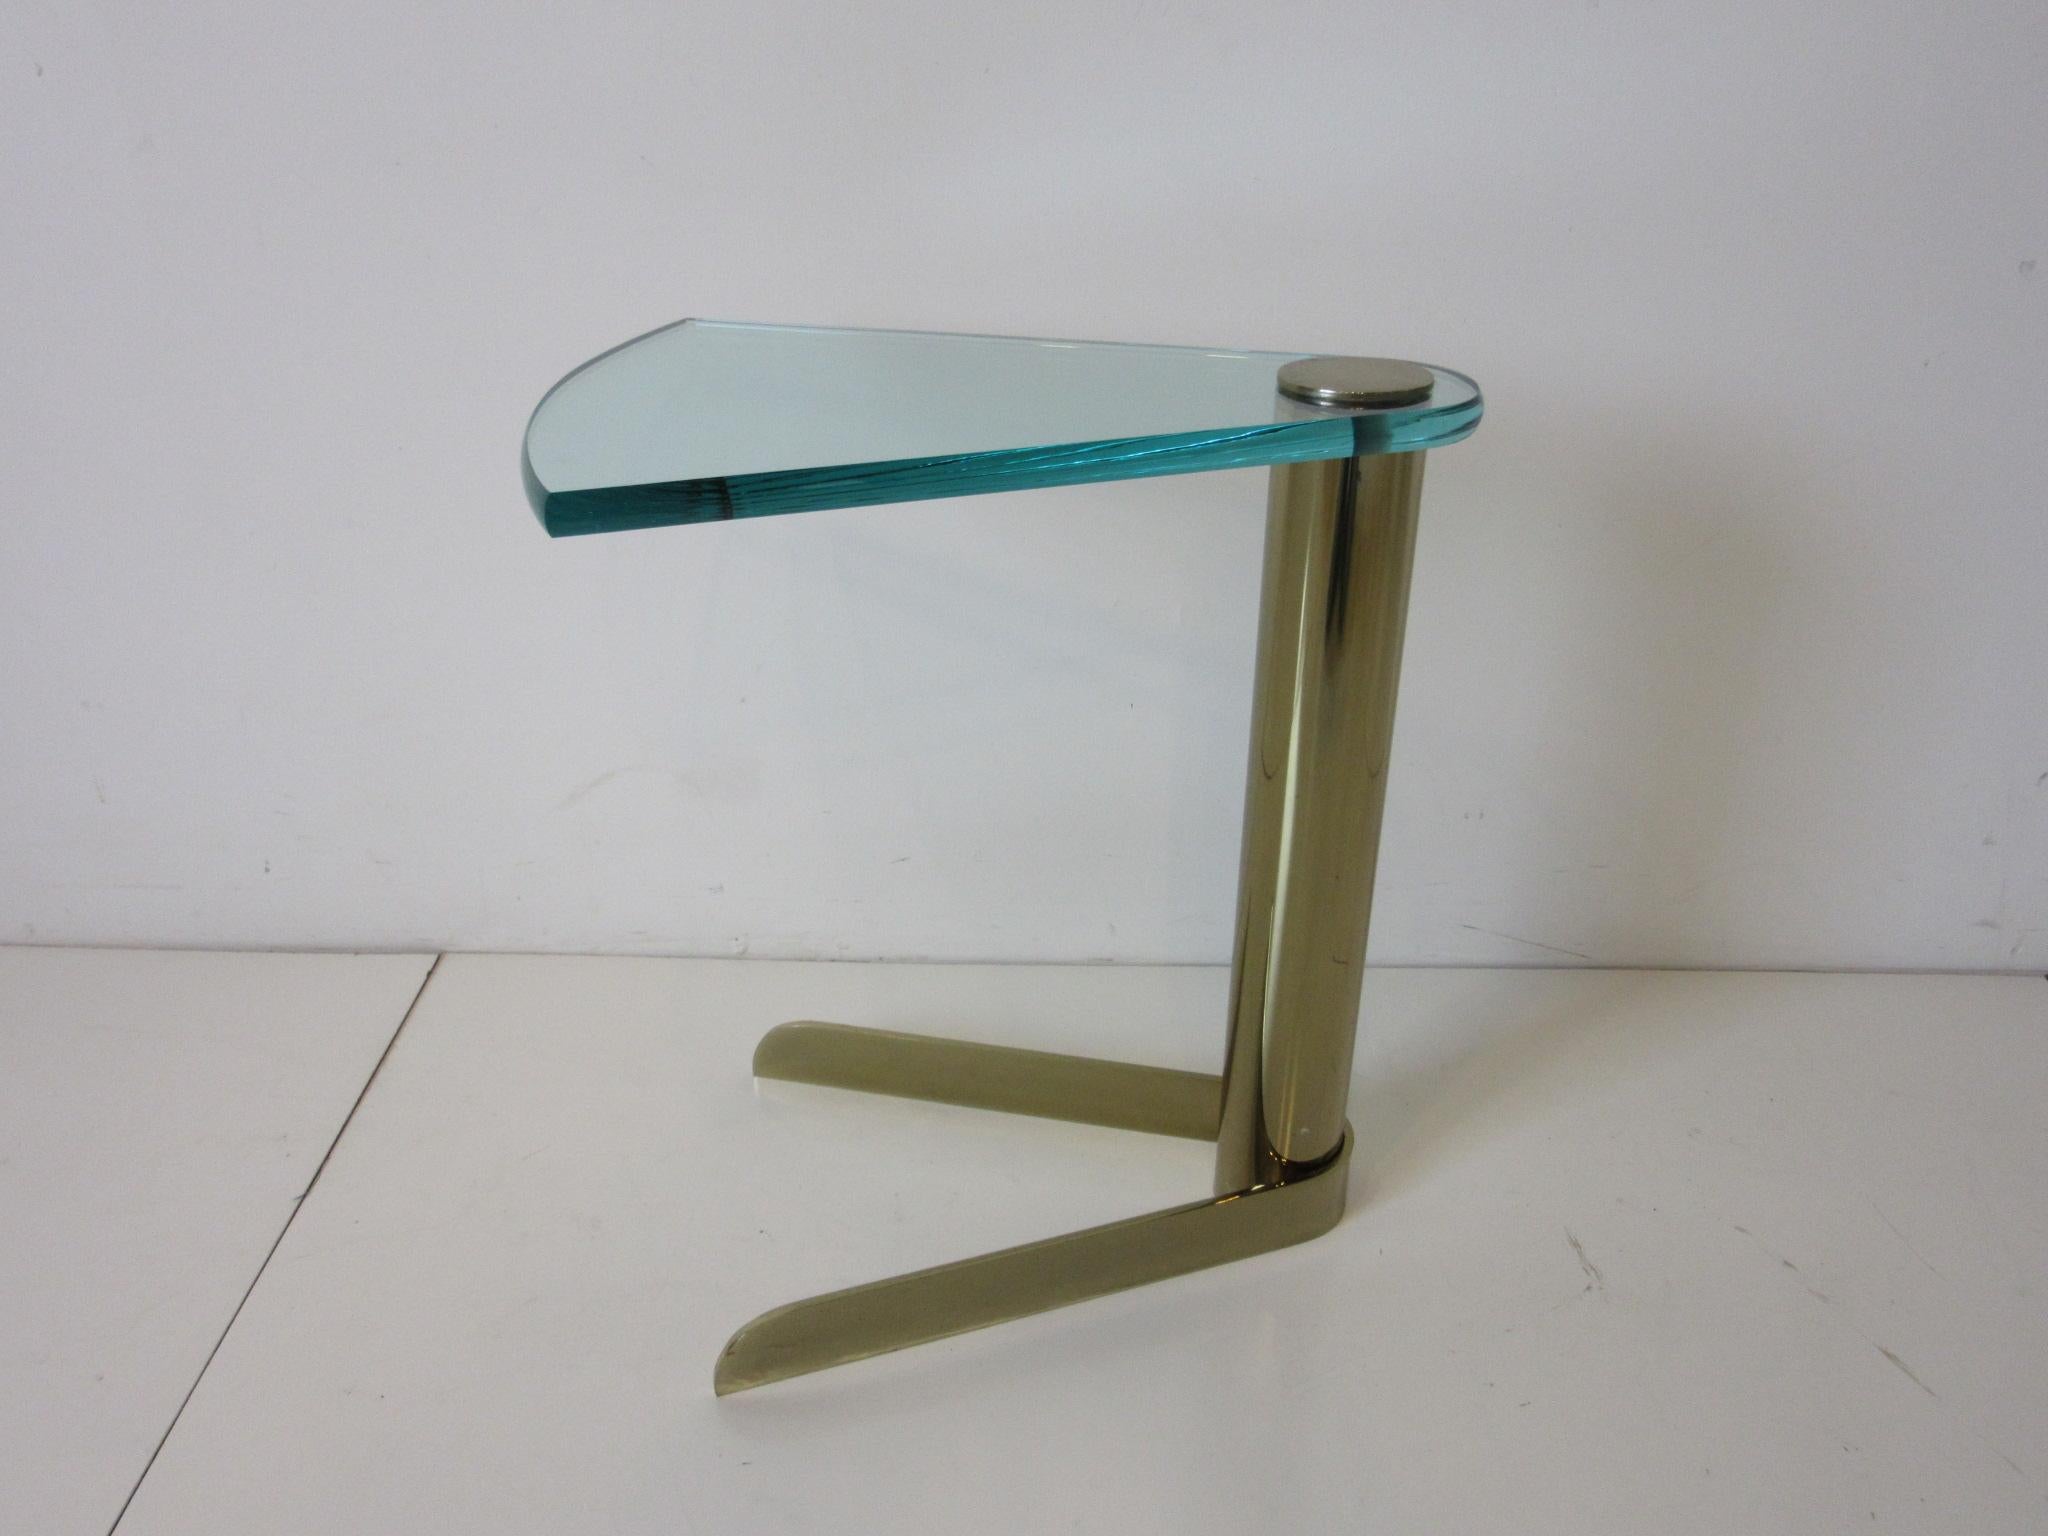 North American Wedge Brass / Glass Side Table from the Leon Pace Collection